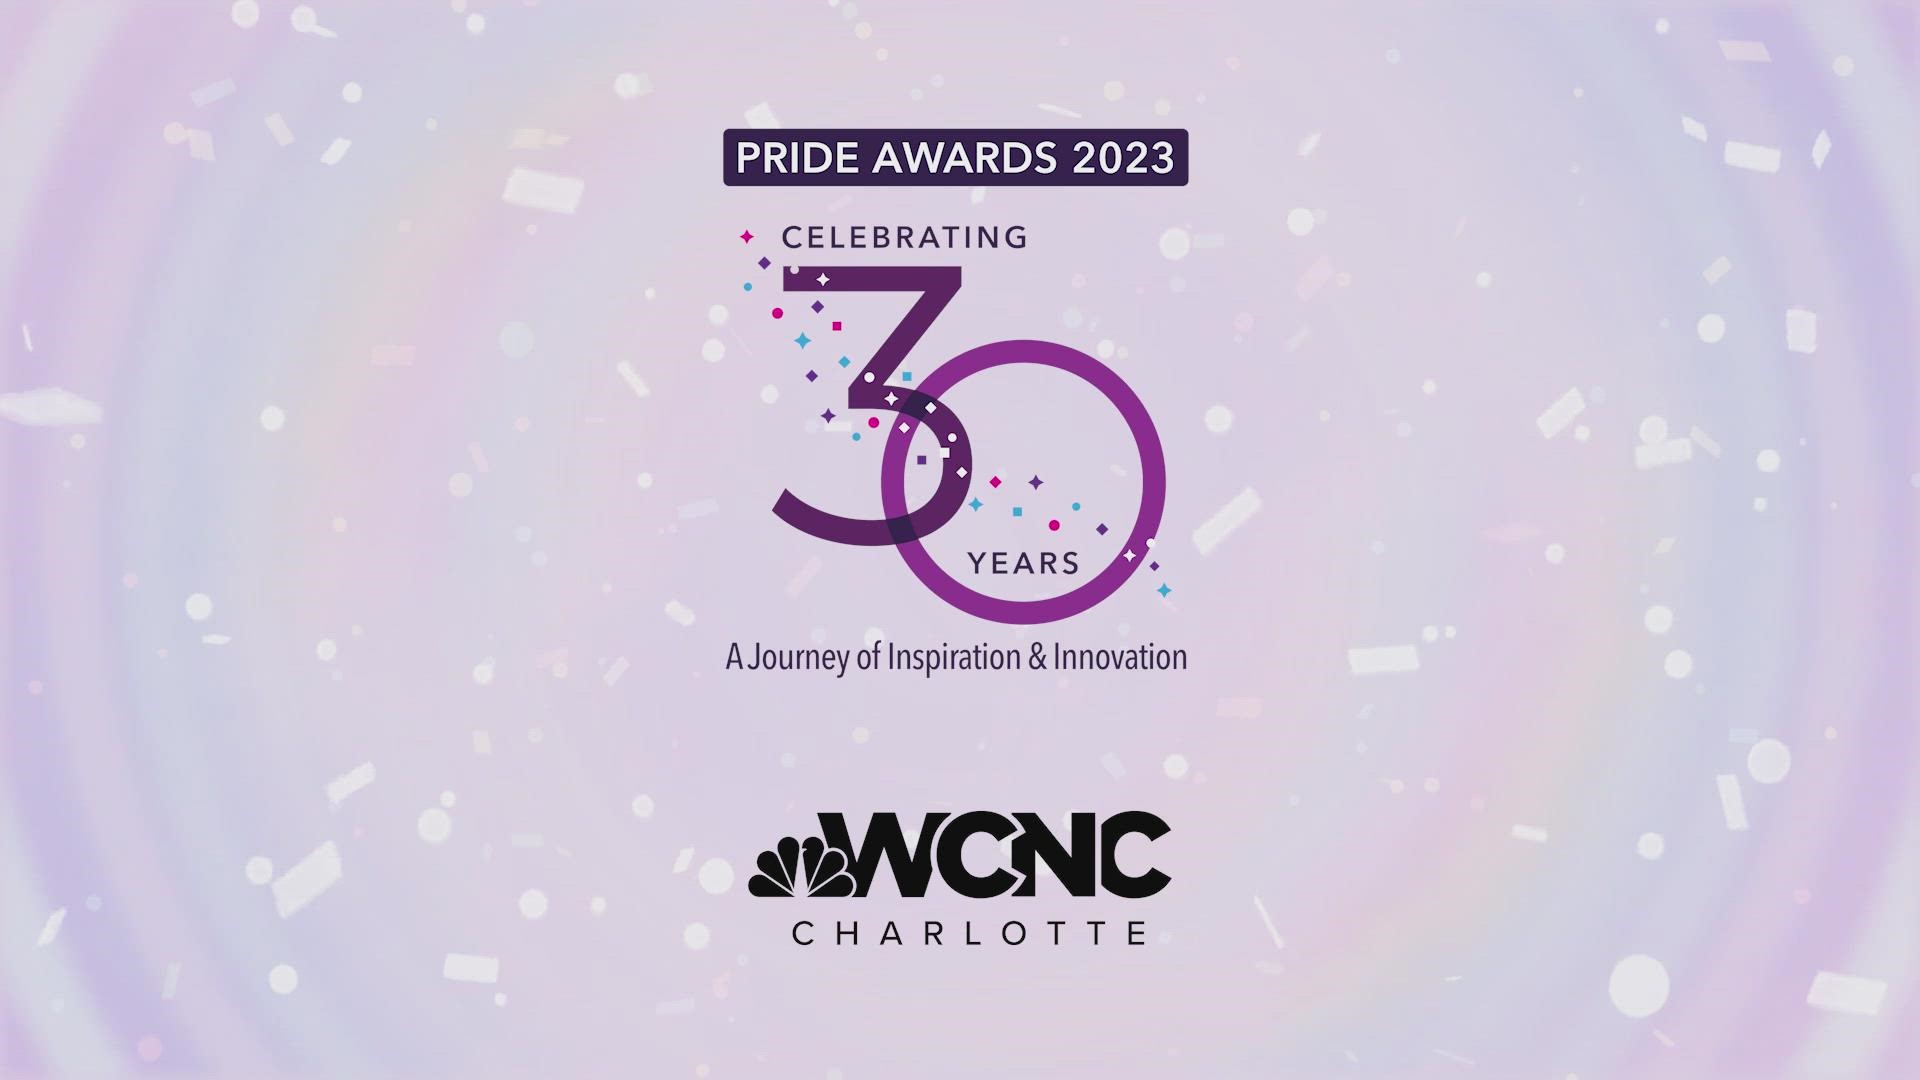 The Pride Awards will celebrate a 30-year journey of inspiration and Innovation with CEO and publisher Dee Dixon.